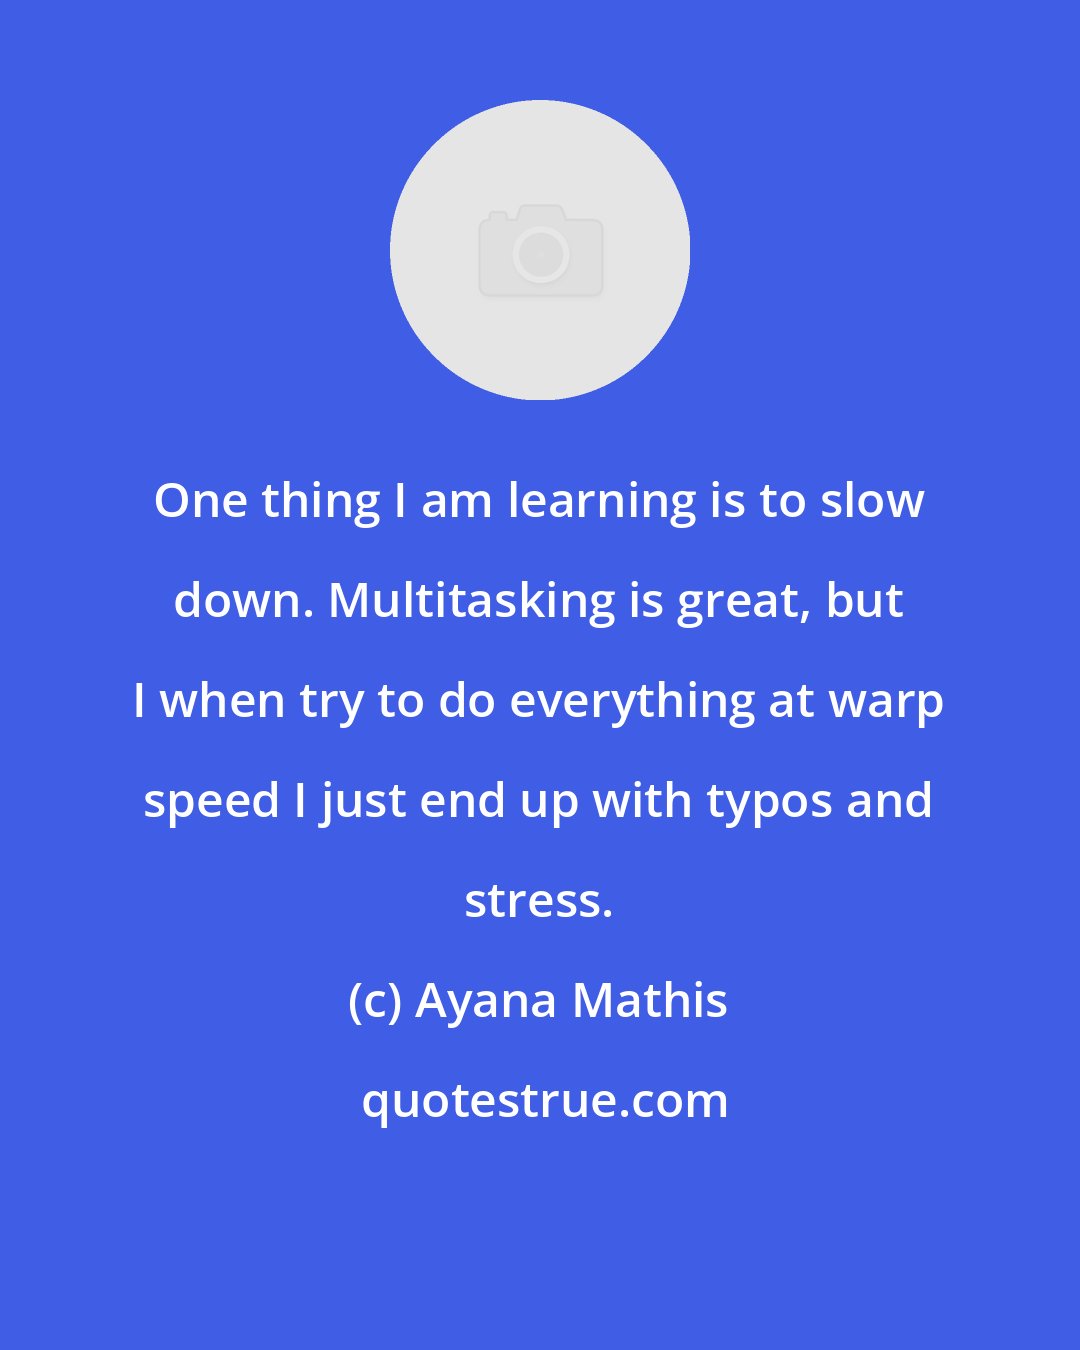 Ayana Mathis: One thing I am learning is to slow down. Multitasking is great, but I when try to do everything at warp speed I just end up with typos and stress.